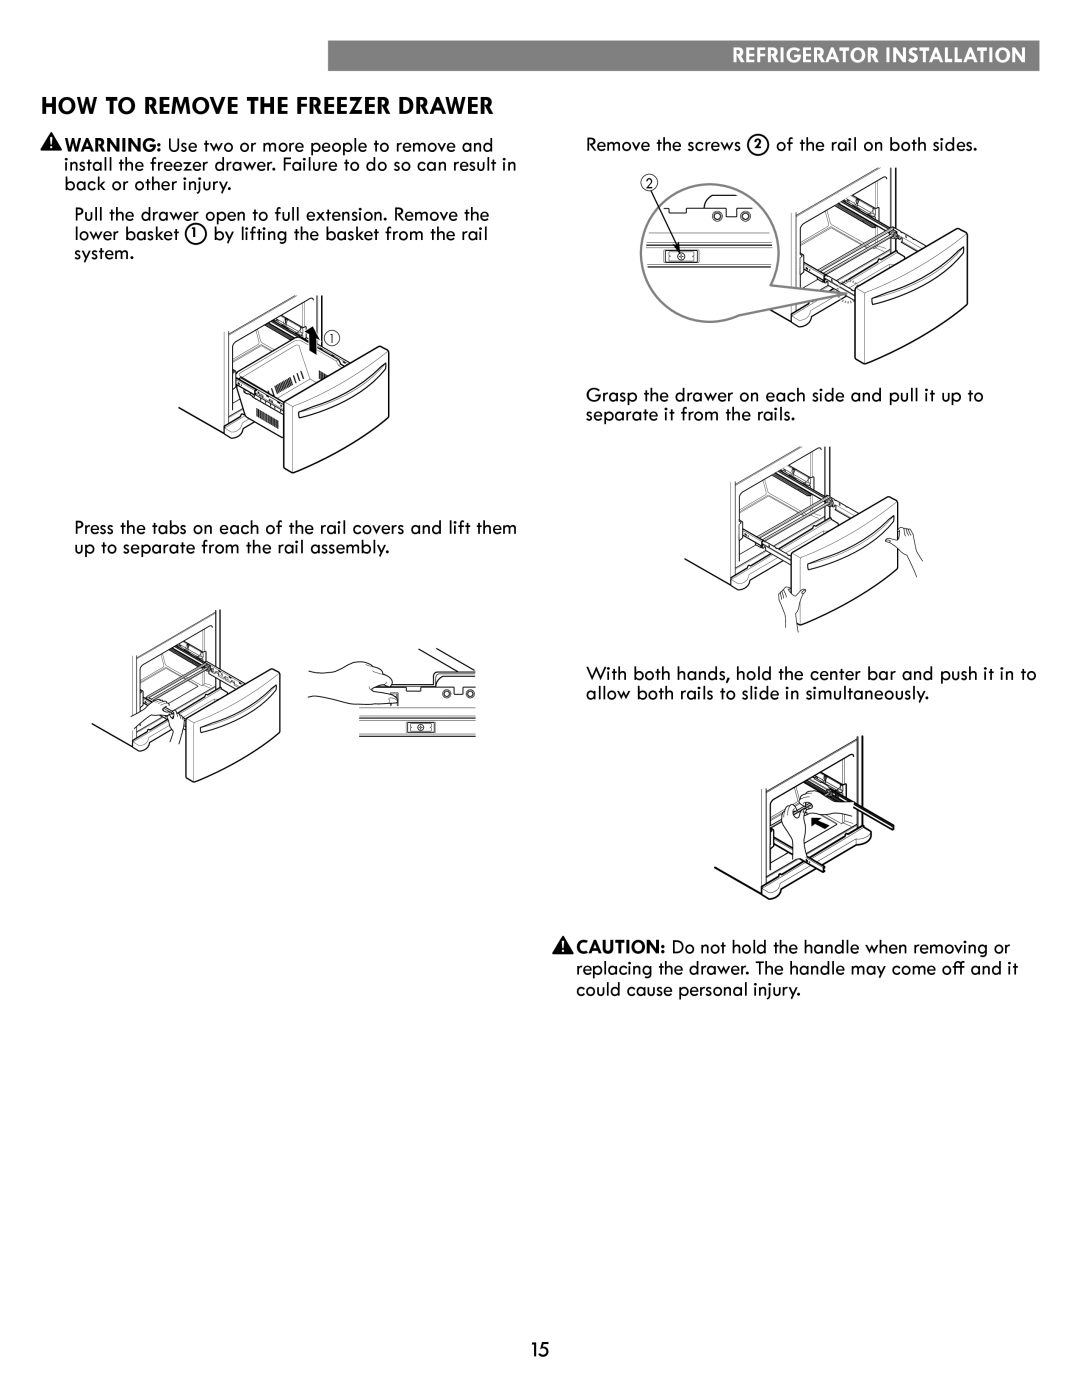 Kenmore kenmore manual How To Remove The Freezer Drawer, Refrigerator Installation 